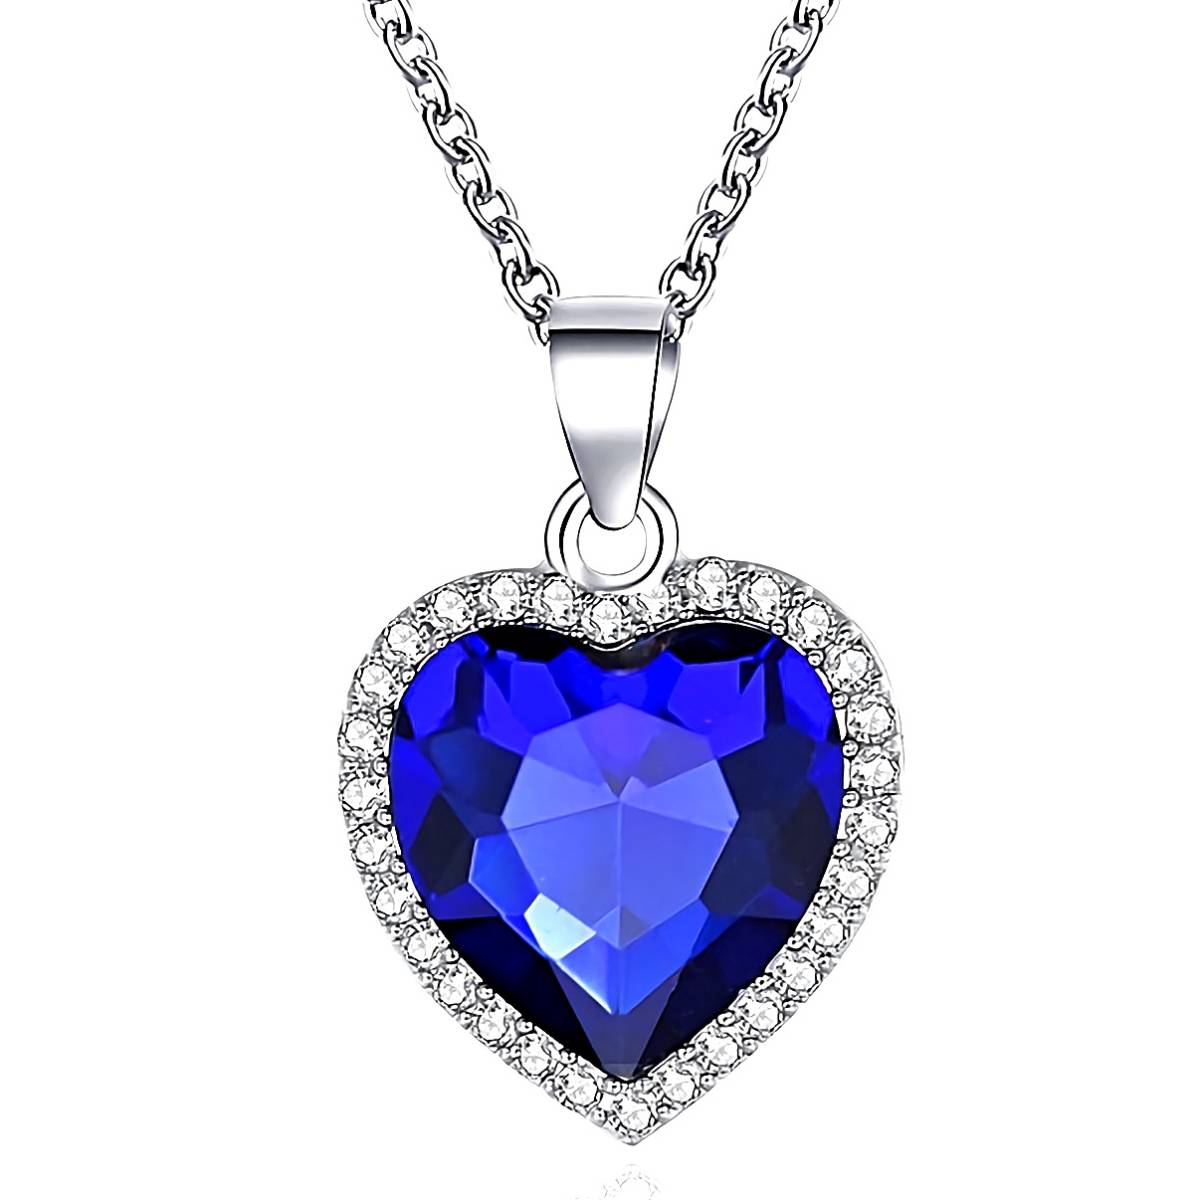  new goods 1 jpy ~* free shipping *. sphere sapphire Heart diamond platinum finish 925 silver necklace birthday present travel summer festival consecutive holidays gift domestic sending 